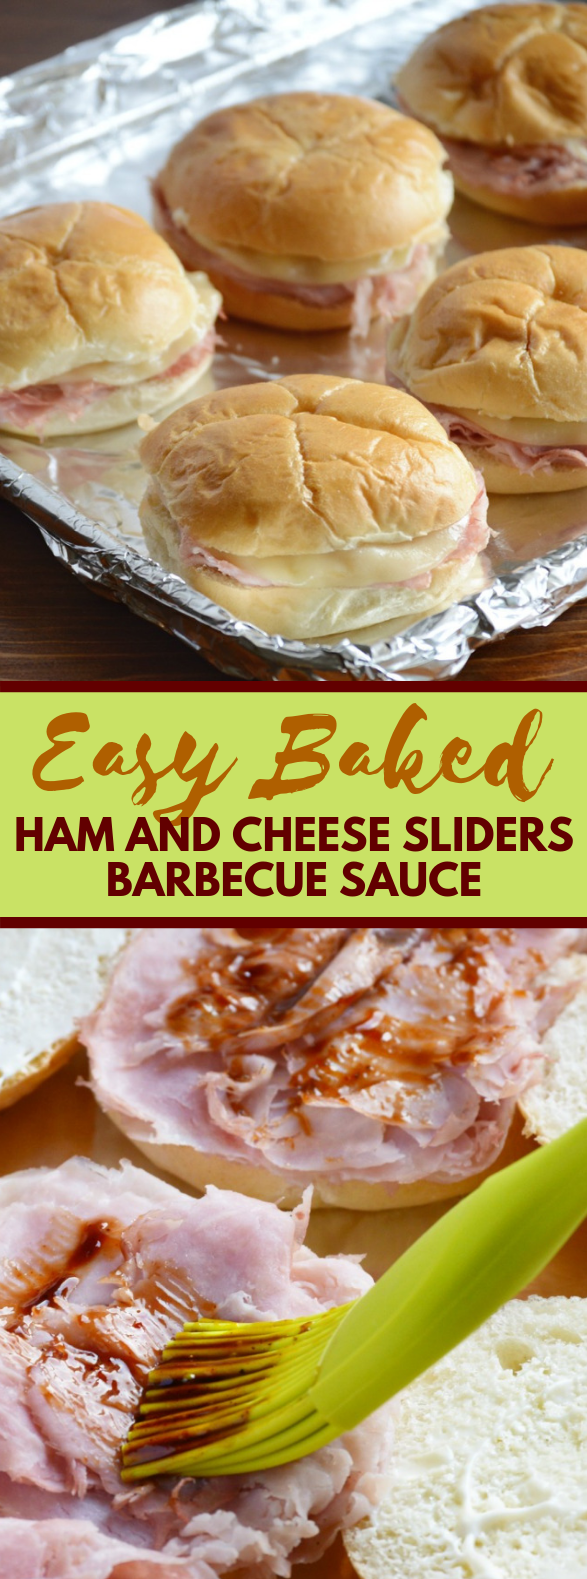 Baked Ham and Cheese Sliders with Barbecue Sauce #easymeal #gameday